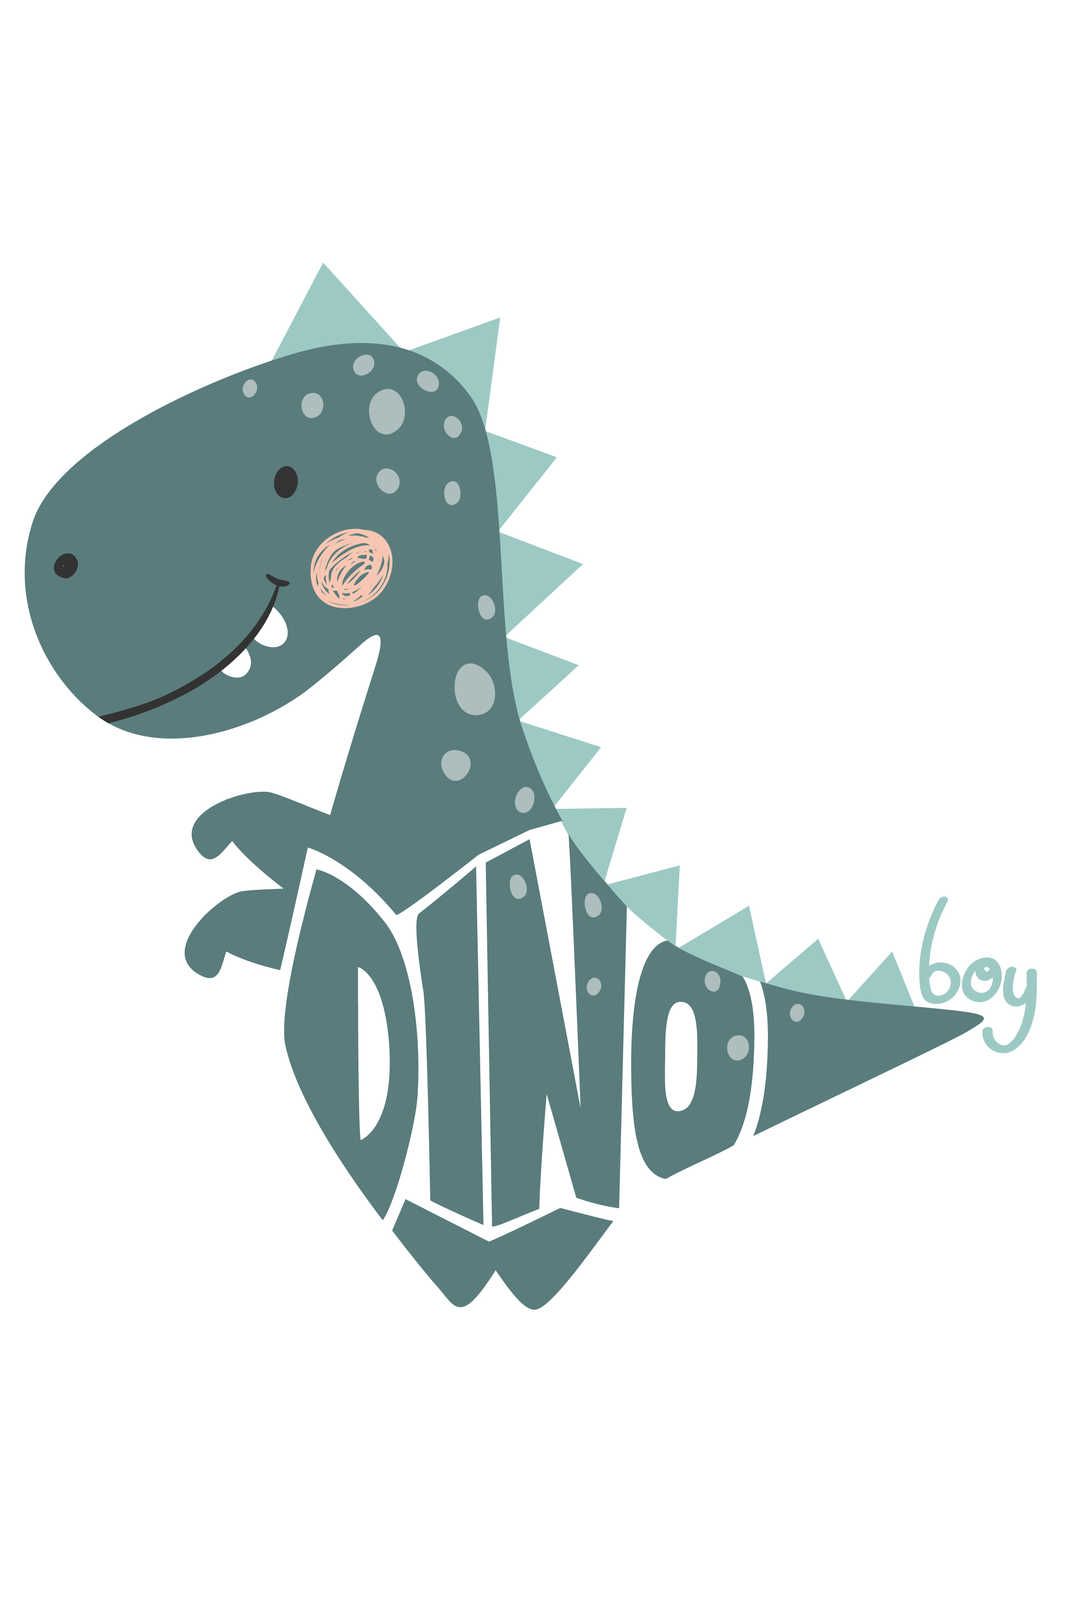             Canvas for children's room with dinosaur - 120 cm x 80 cm
        